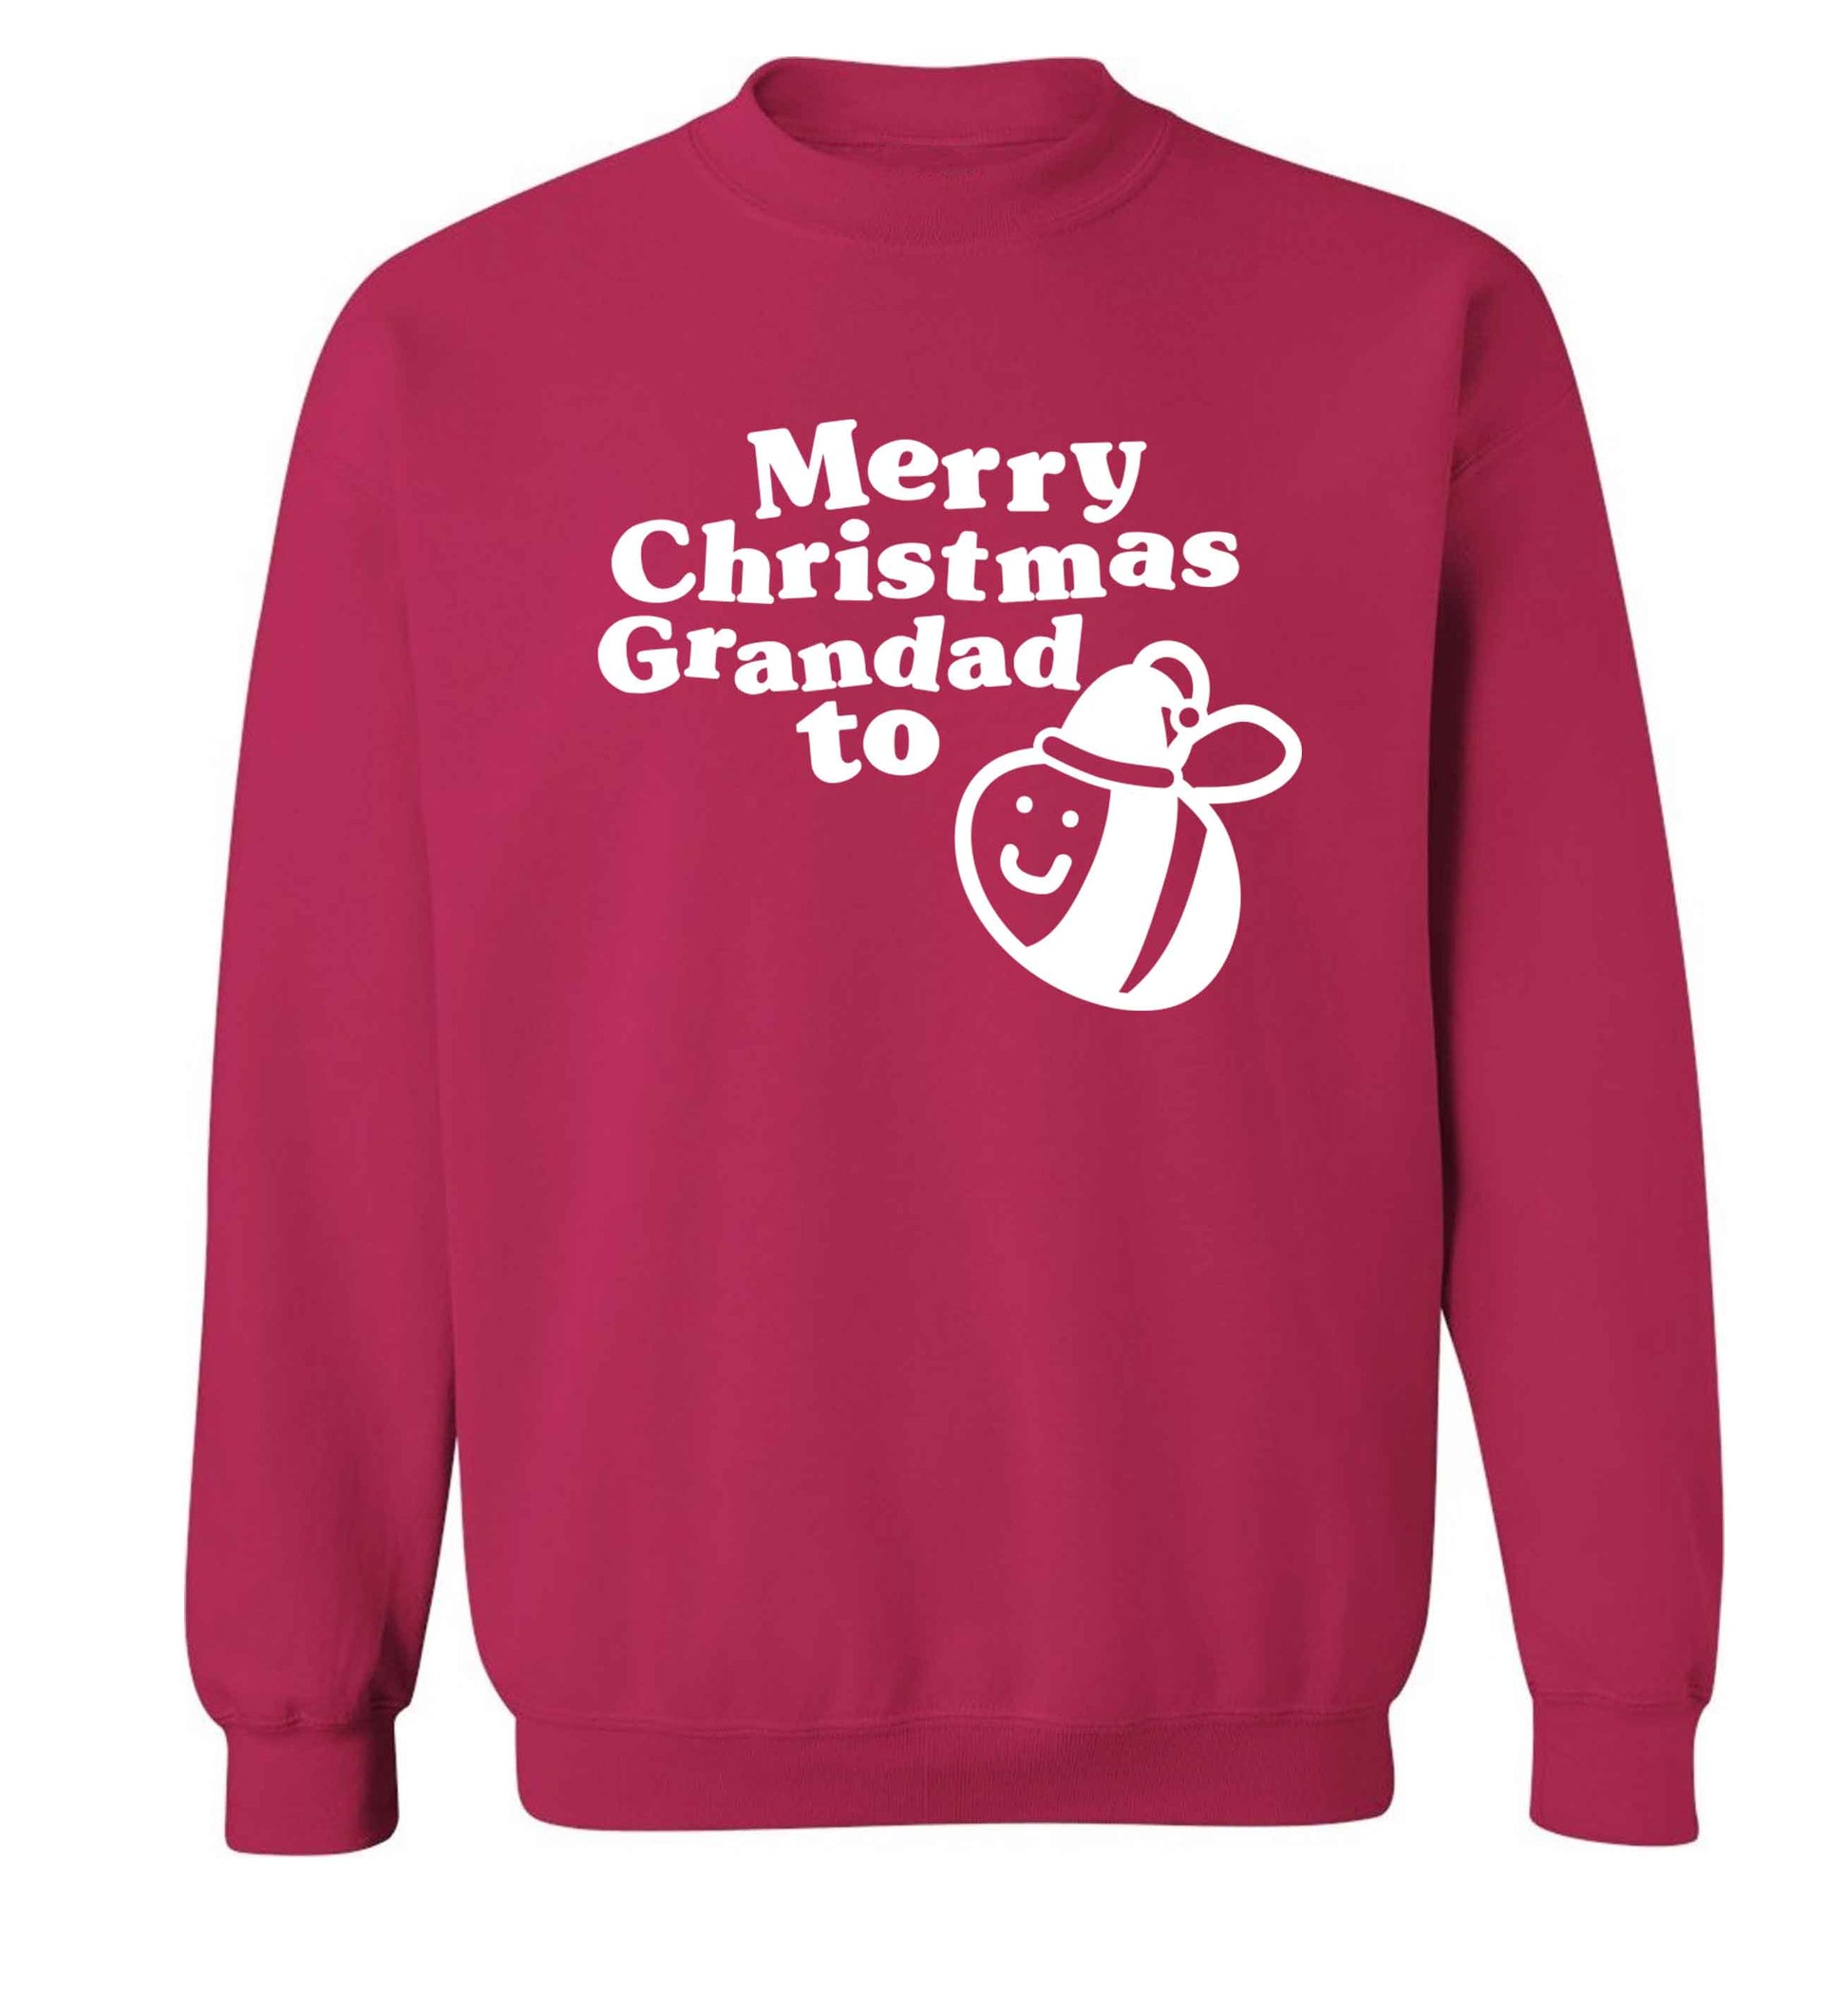 Merry Christmas grandad to be Adult's unisex pink Sweater 2XL